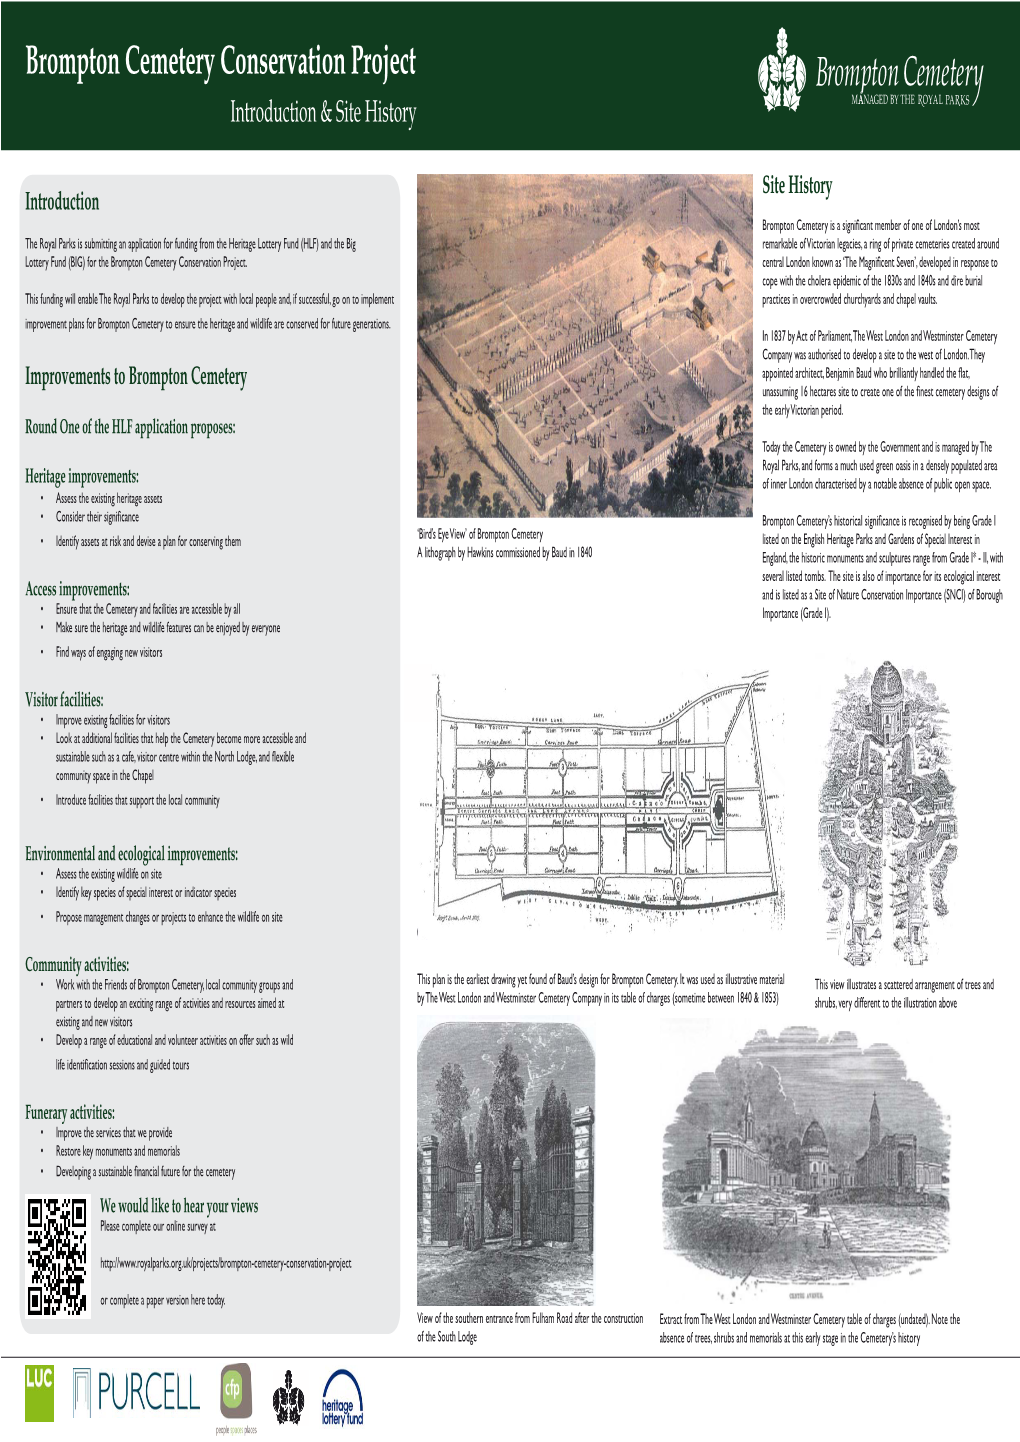 Brompton Cemetery Conservation Project Introduction & Site History